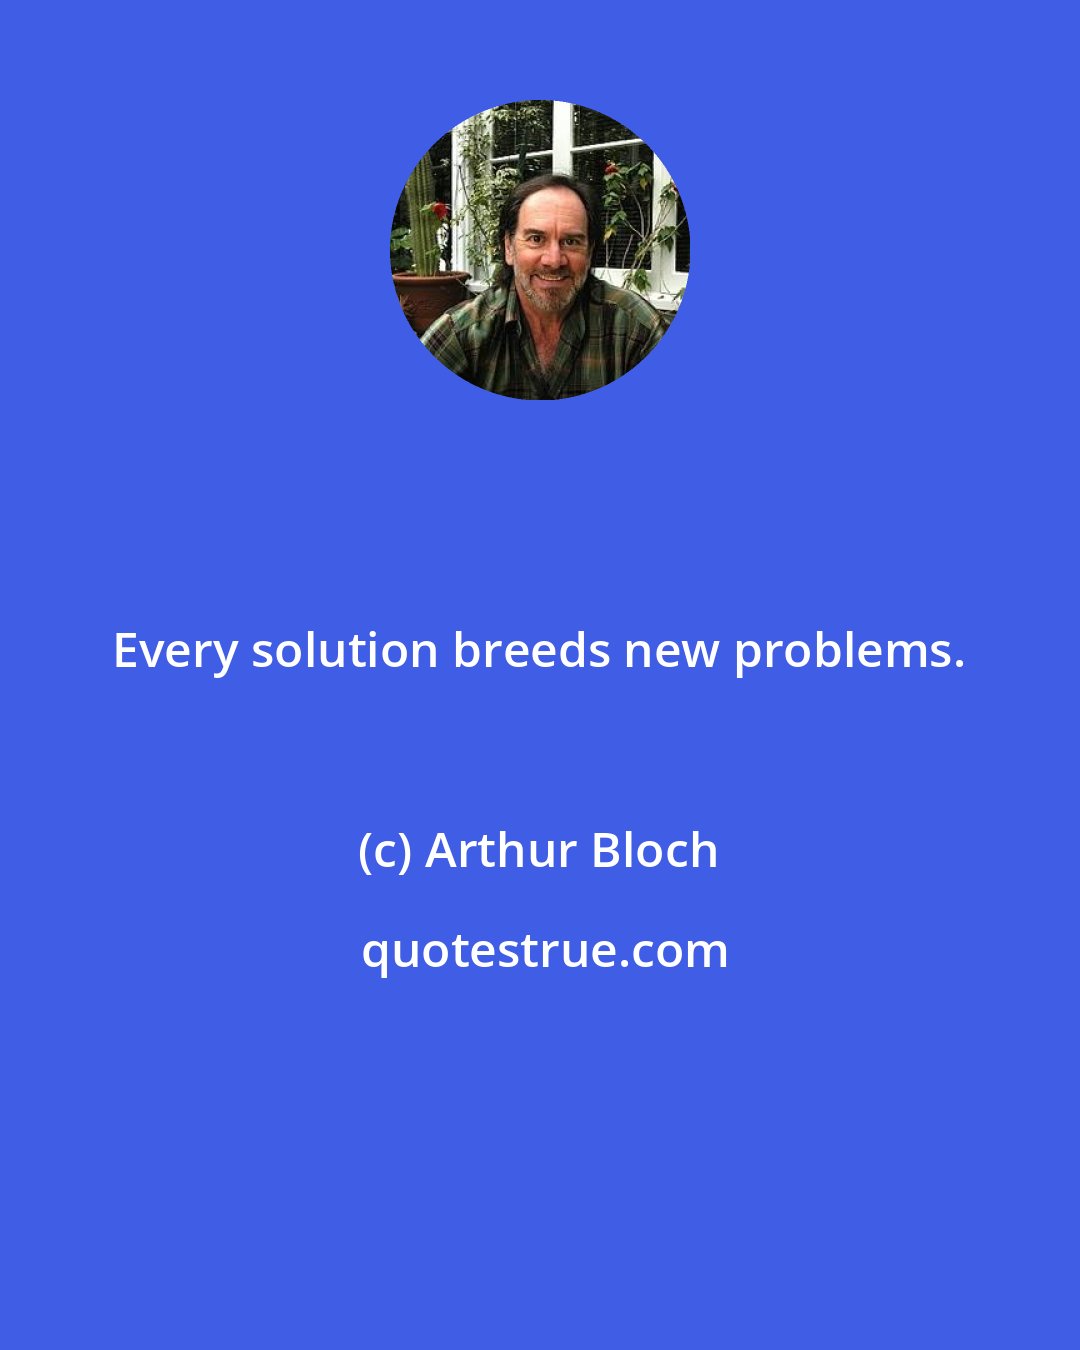 Arthur Bloch: Every solution breeds new problems.